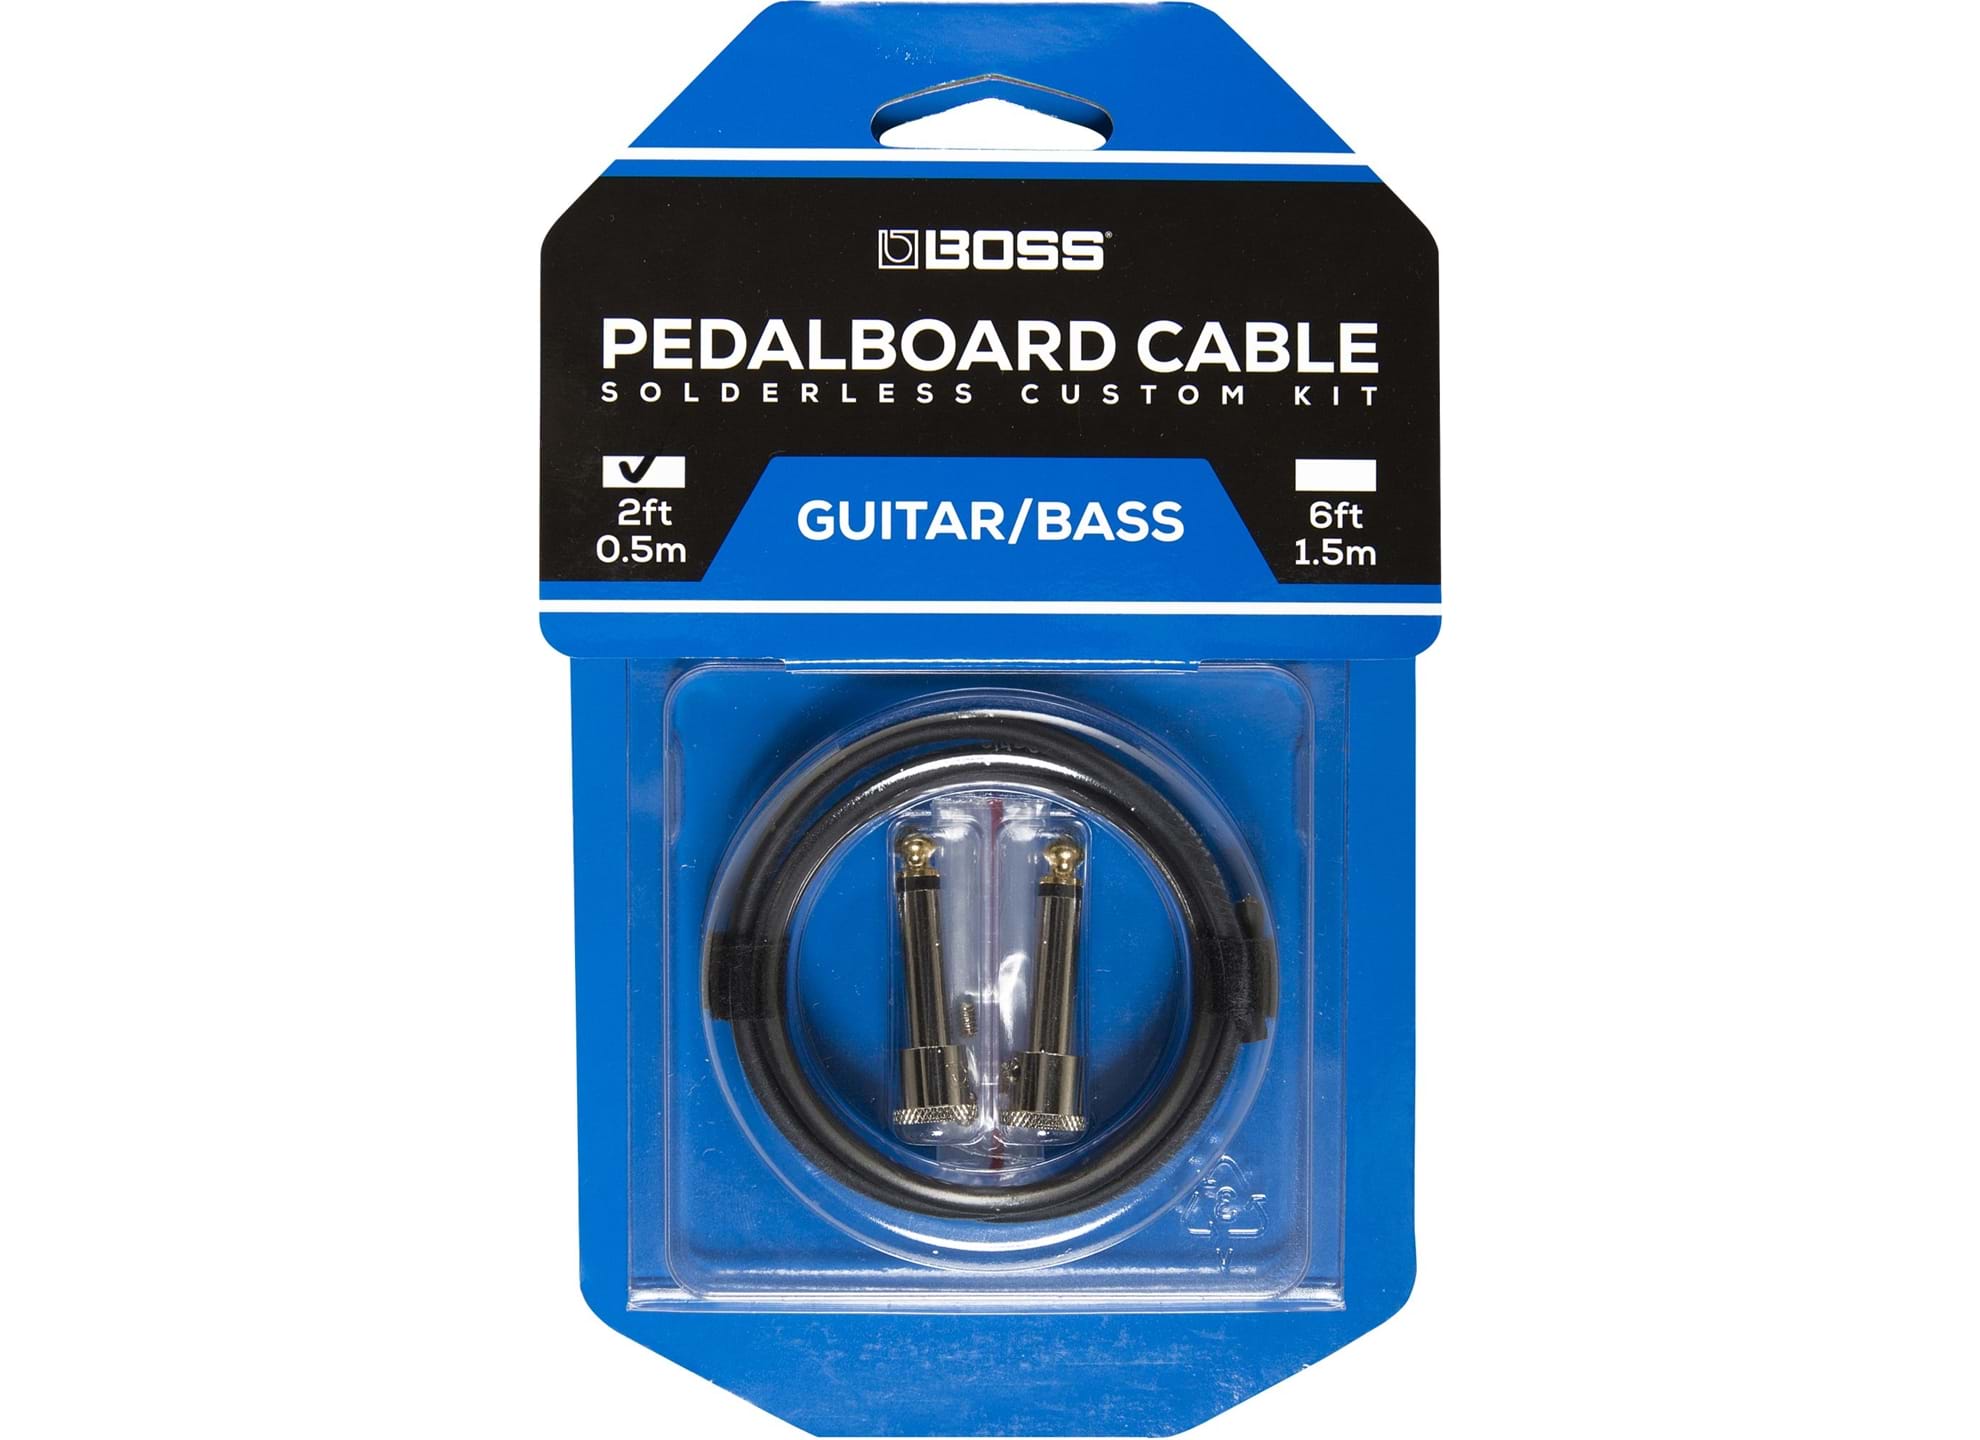 BCK-2 Pedalboard Cable Kit 0.5m